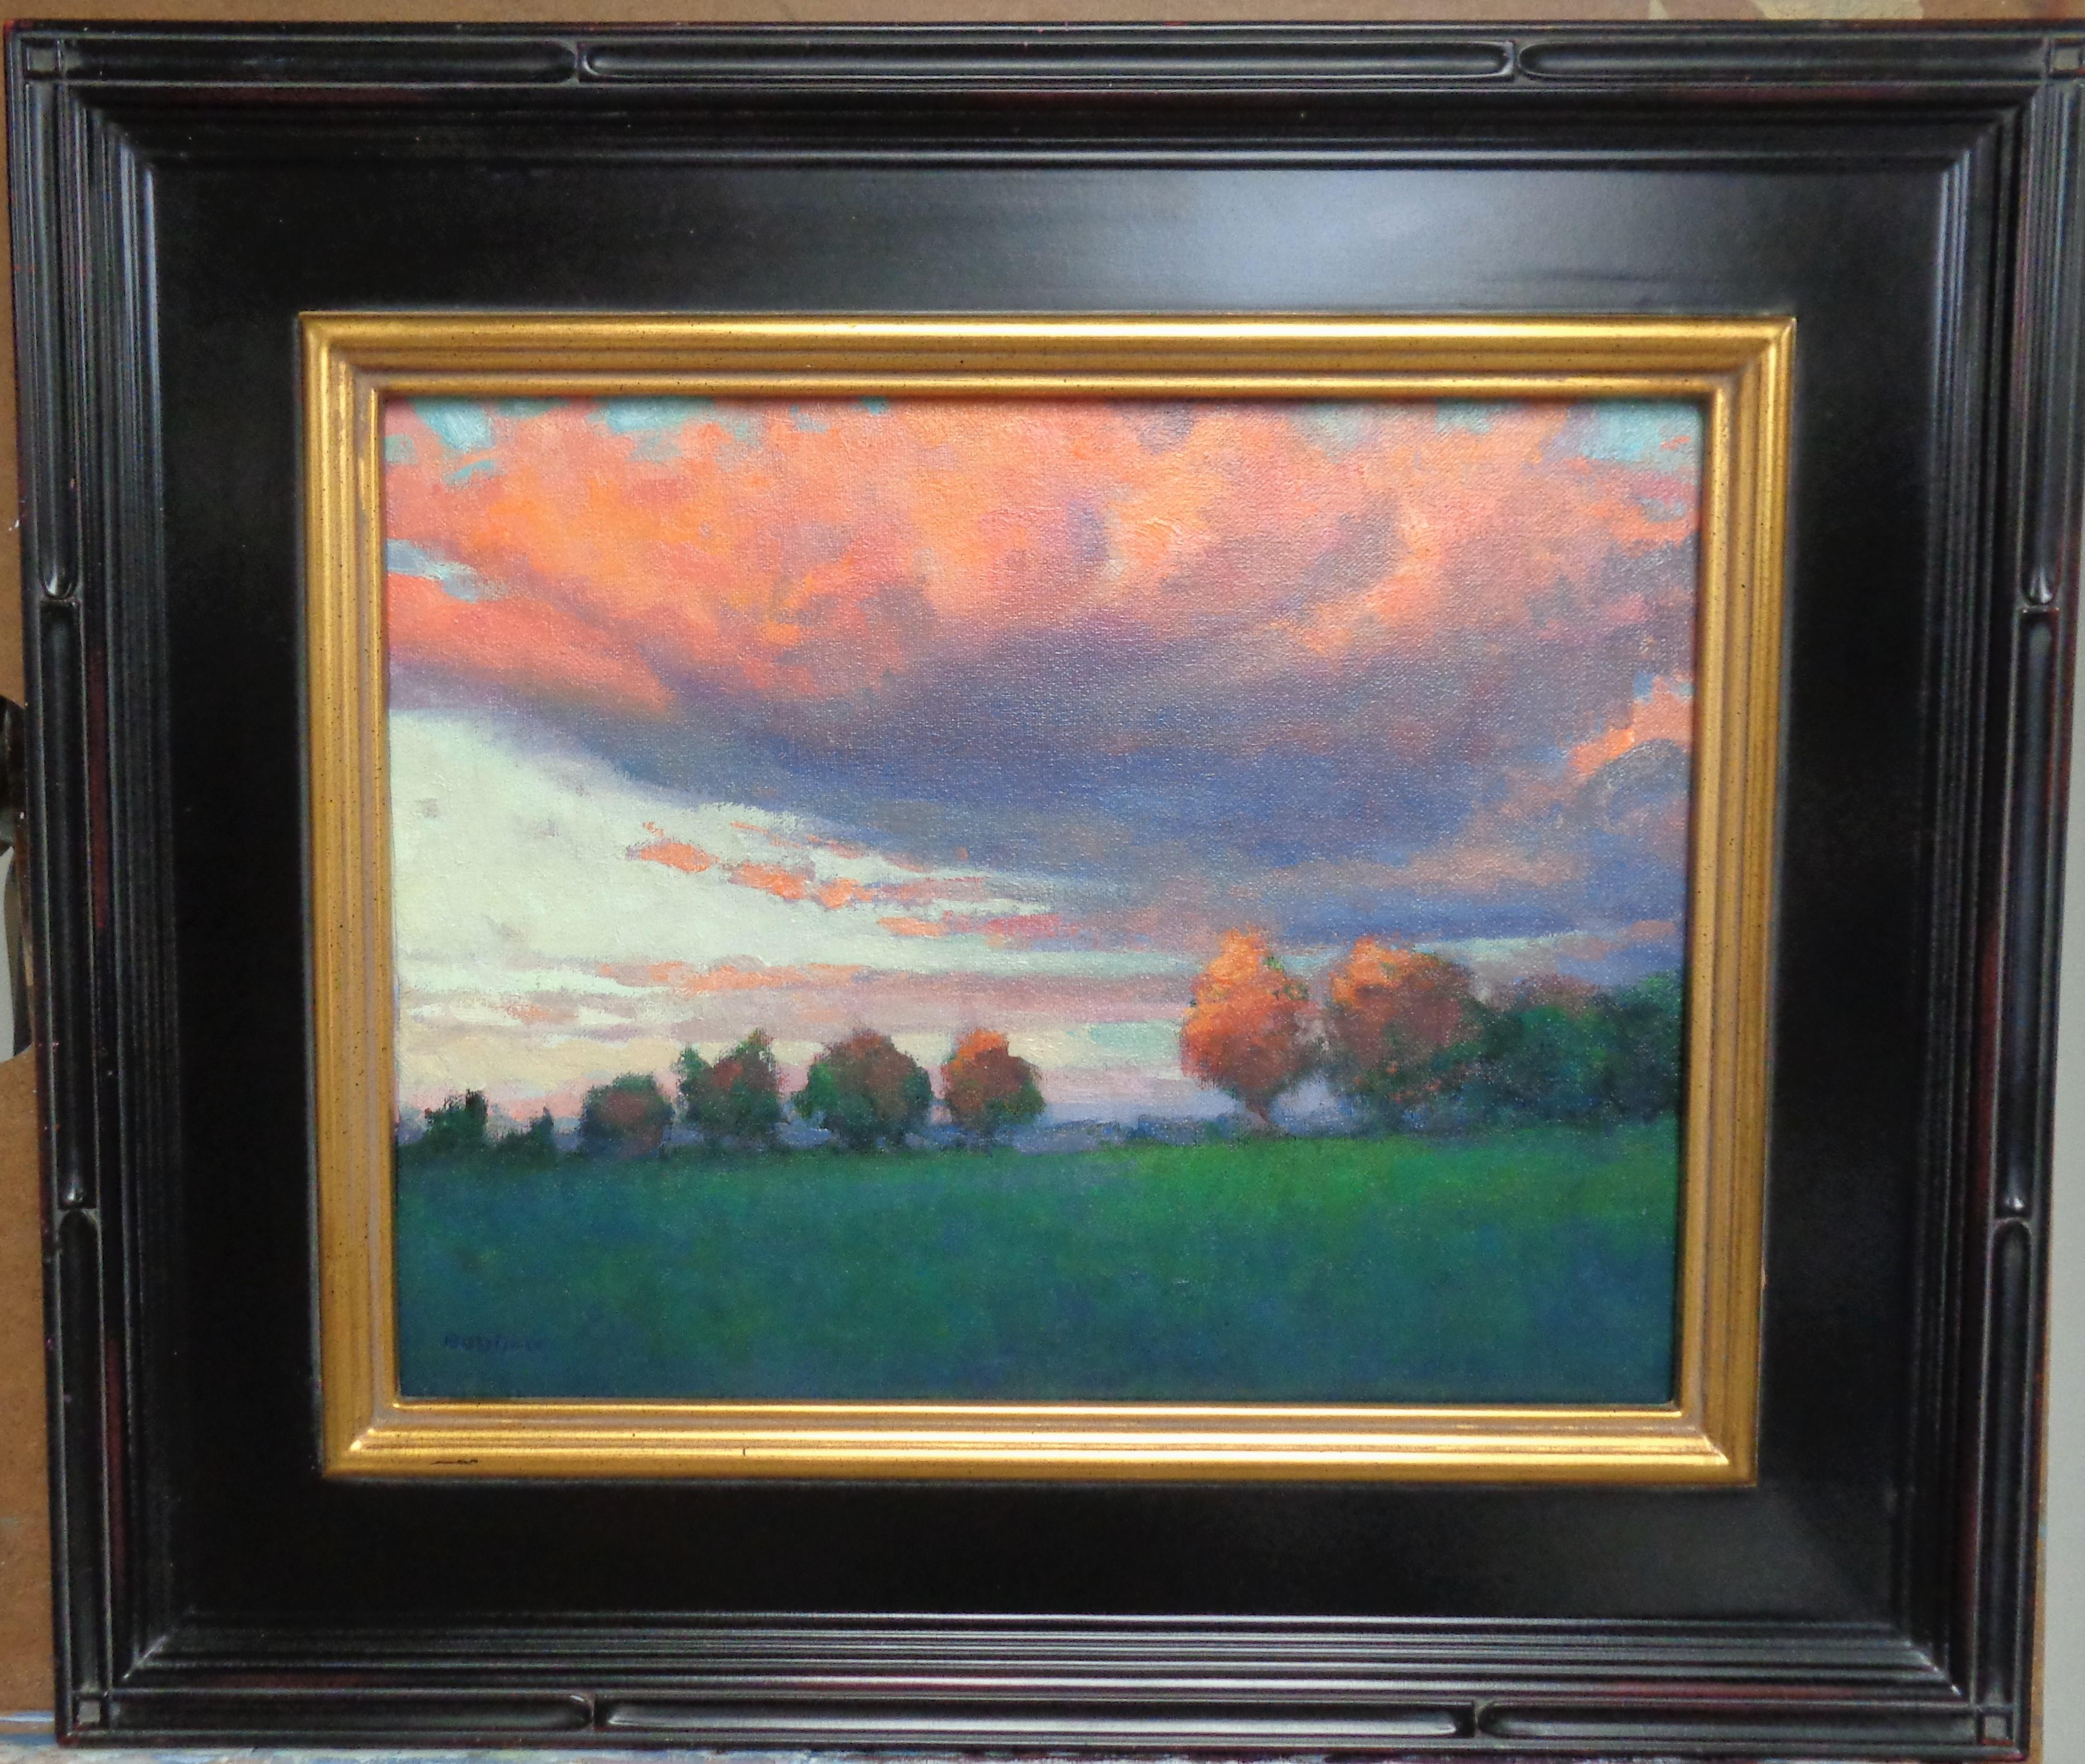 "Inspiration II " is a beautiful impressionistic sunset landscape oil painting that I did of a farm near my studio in 2020. The painting is on a canvas panel and exudes the rich qualities of oil paint with bright strong color, a variety of lost and